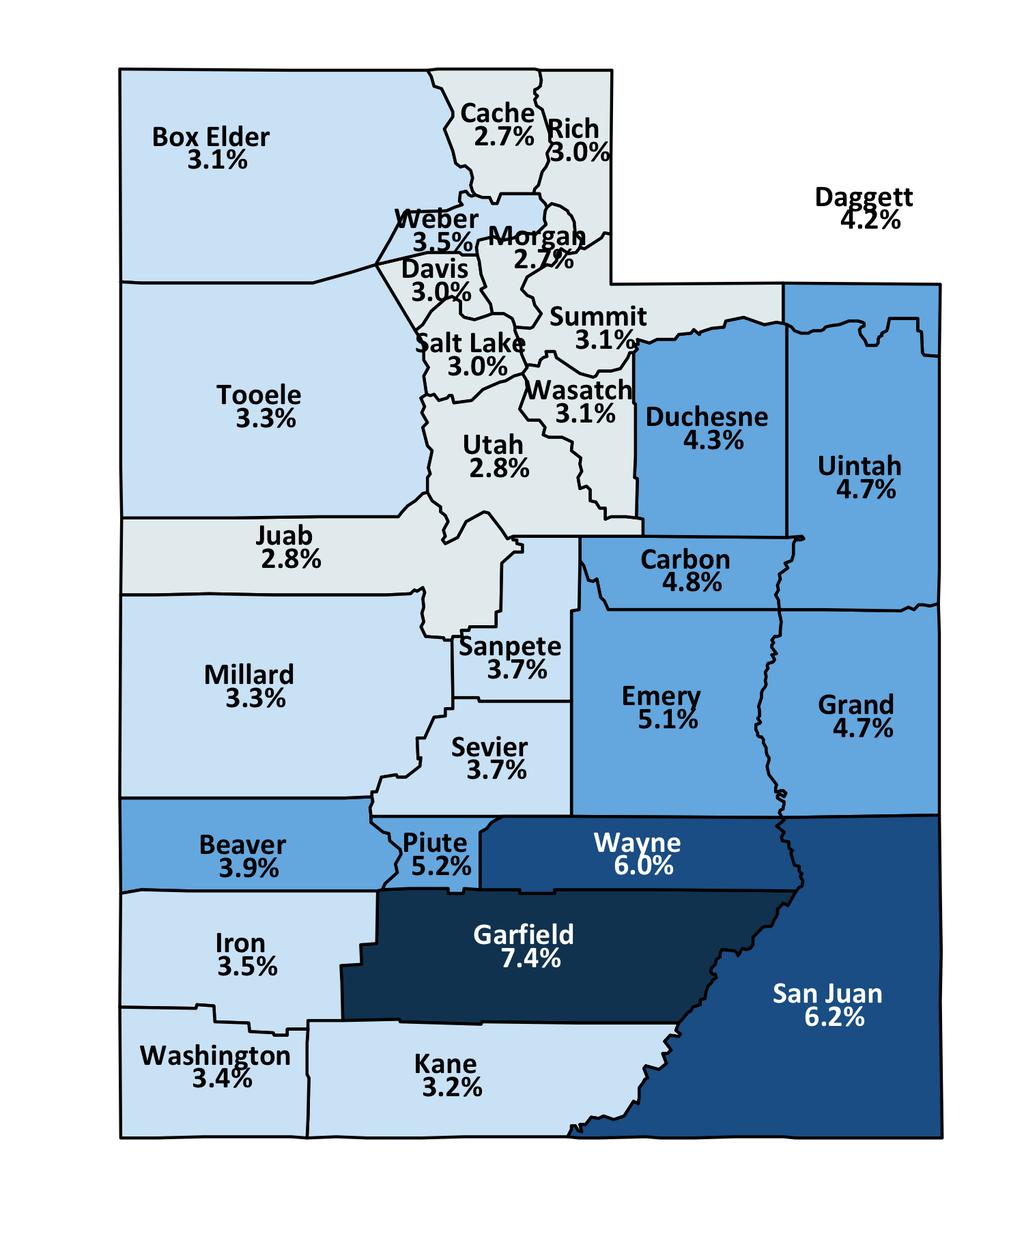 Utah Unemployment Rates By County April 2018 State Rate = 3.1% 7.0% + 6.0% to 6.